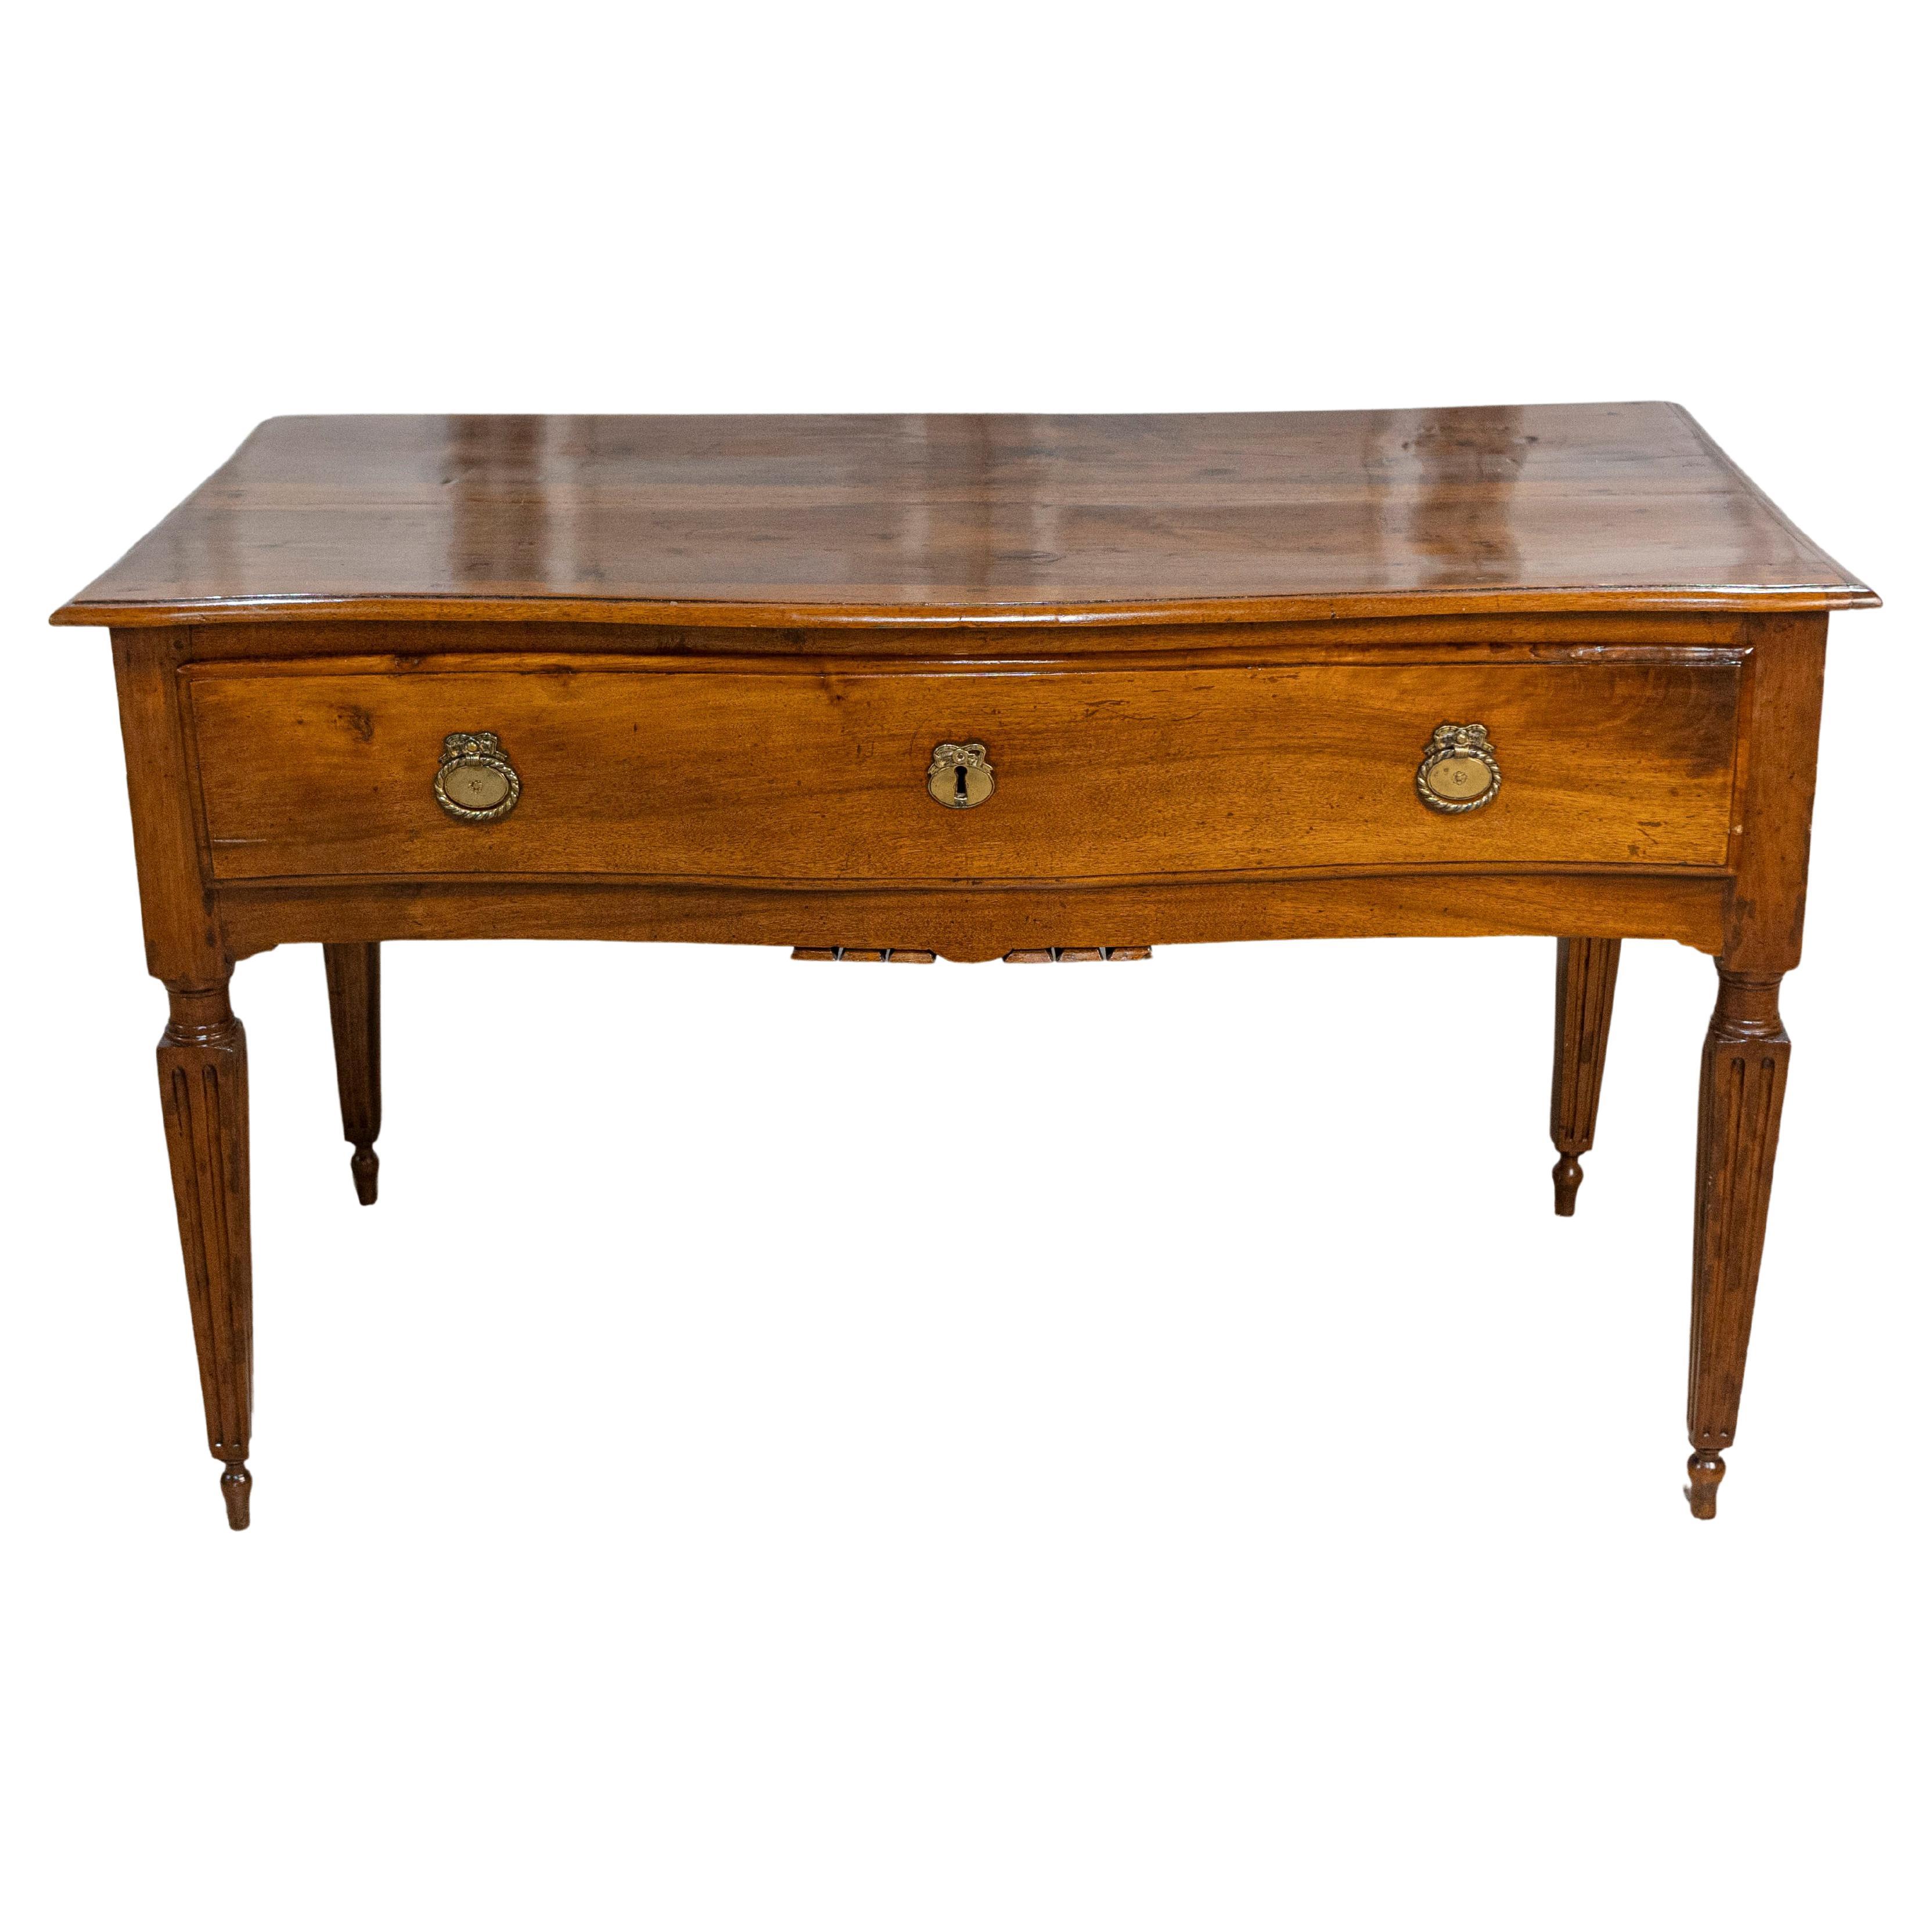 Italian Louis XVI 18th Century Walnut Console Table with Carved Fluted Legs For Sale